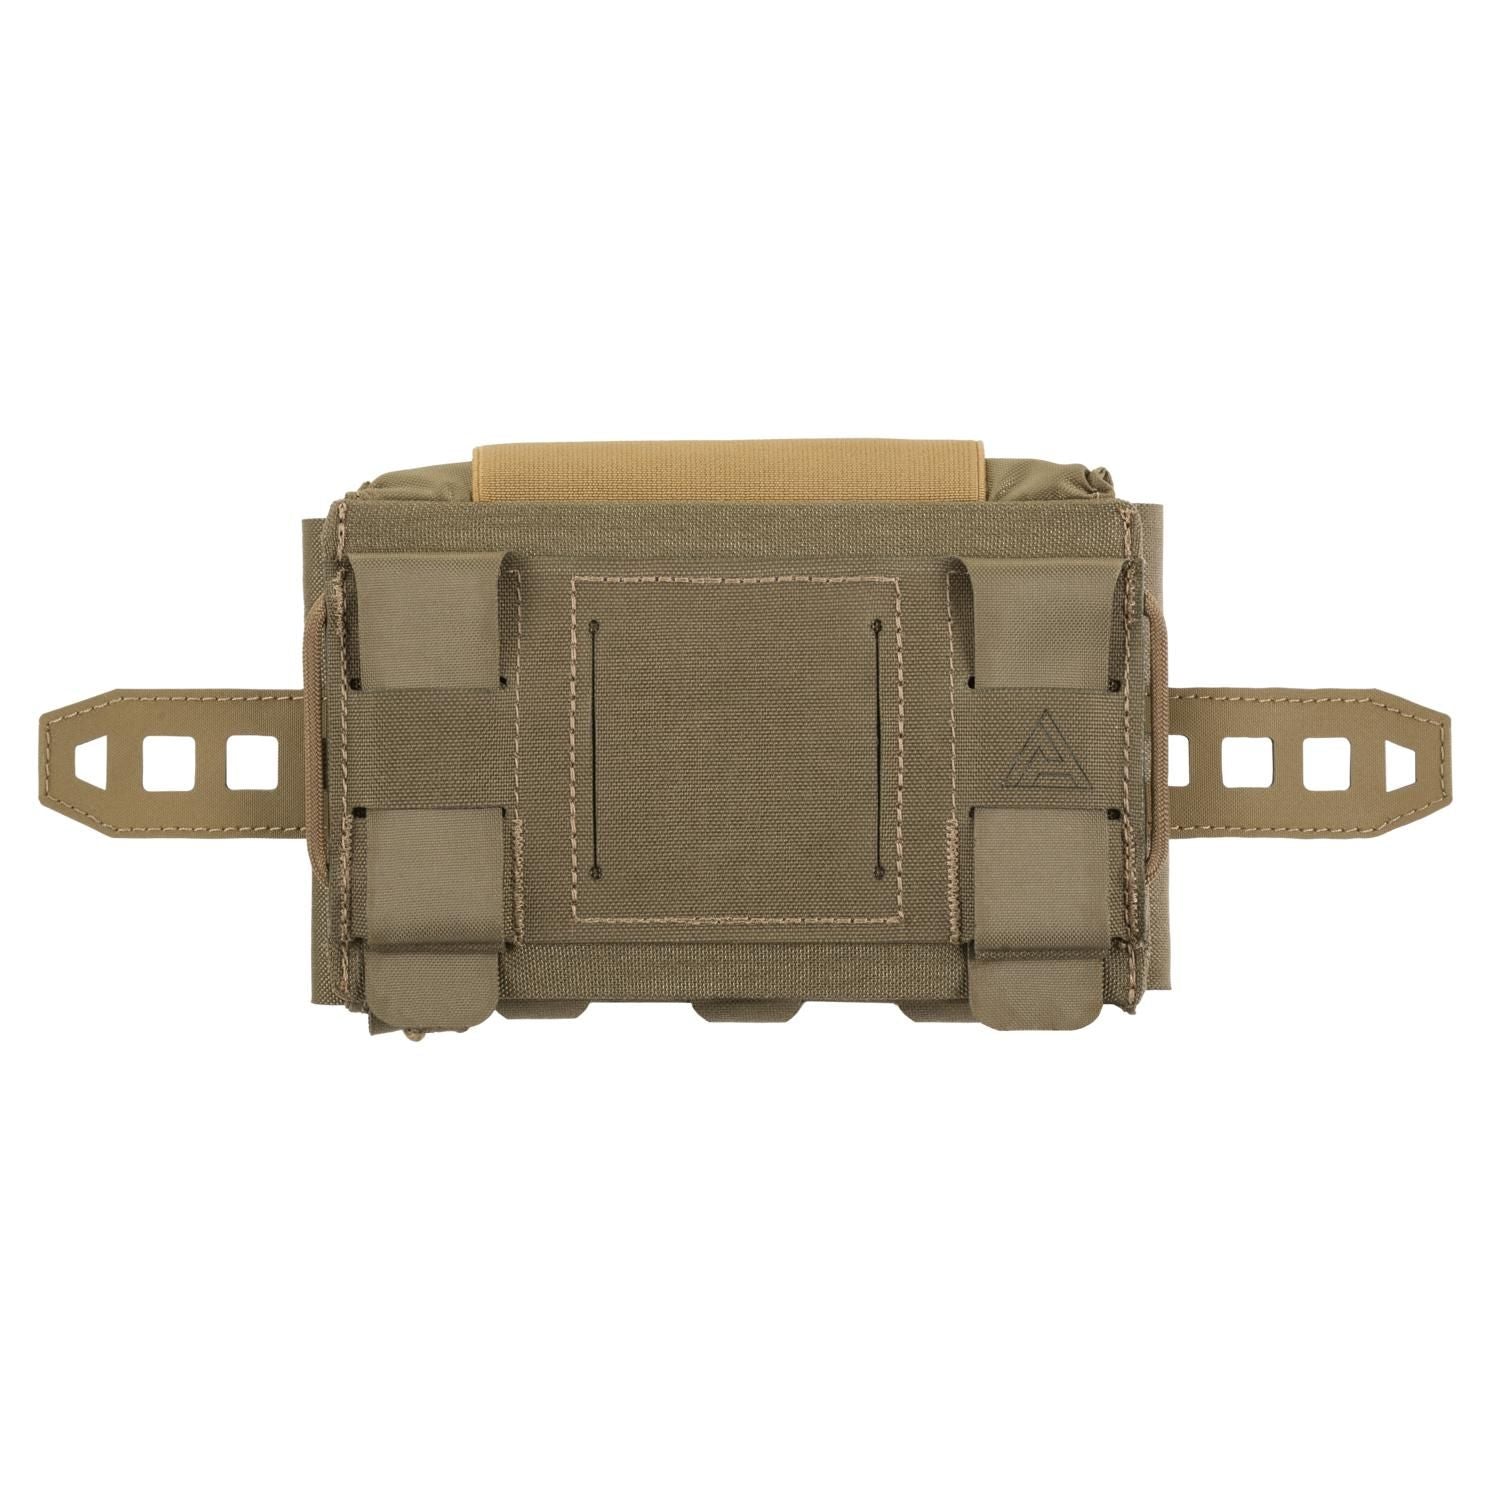 Compact Med Pouch Horizontal - Coyote Brown